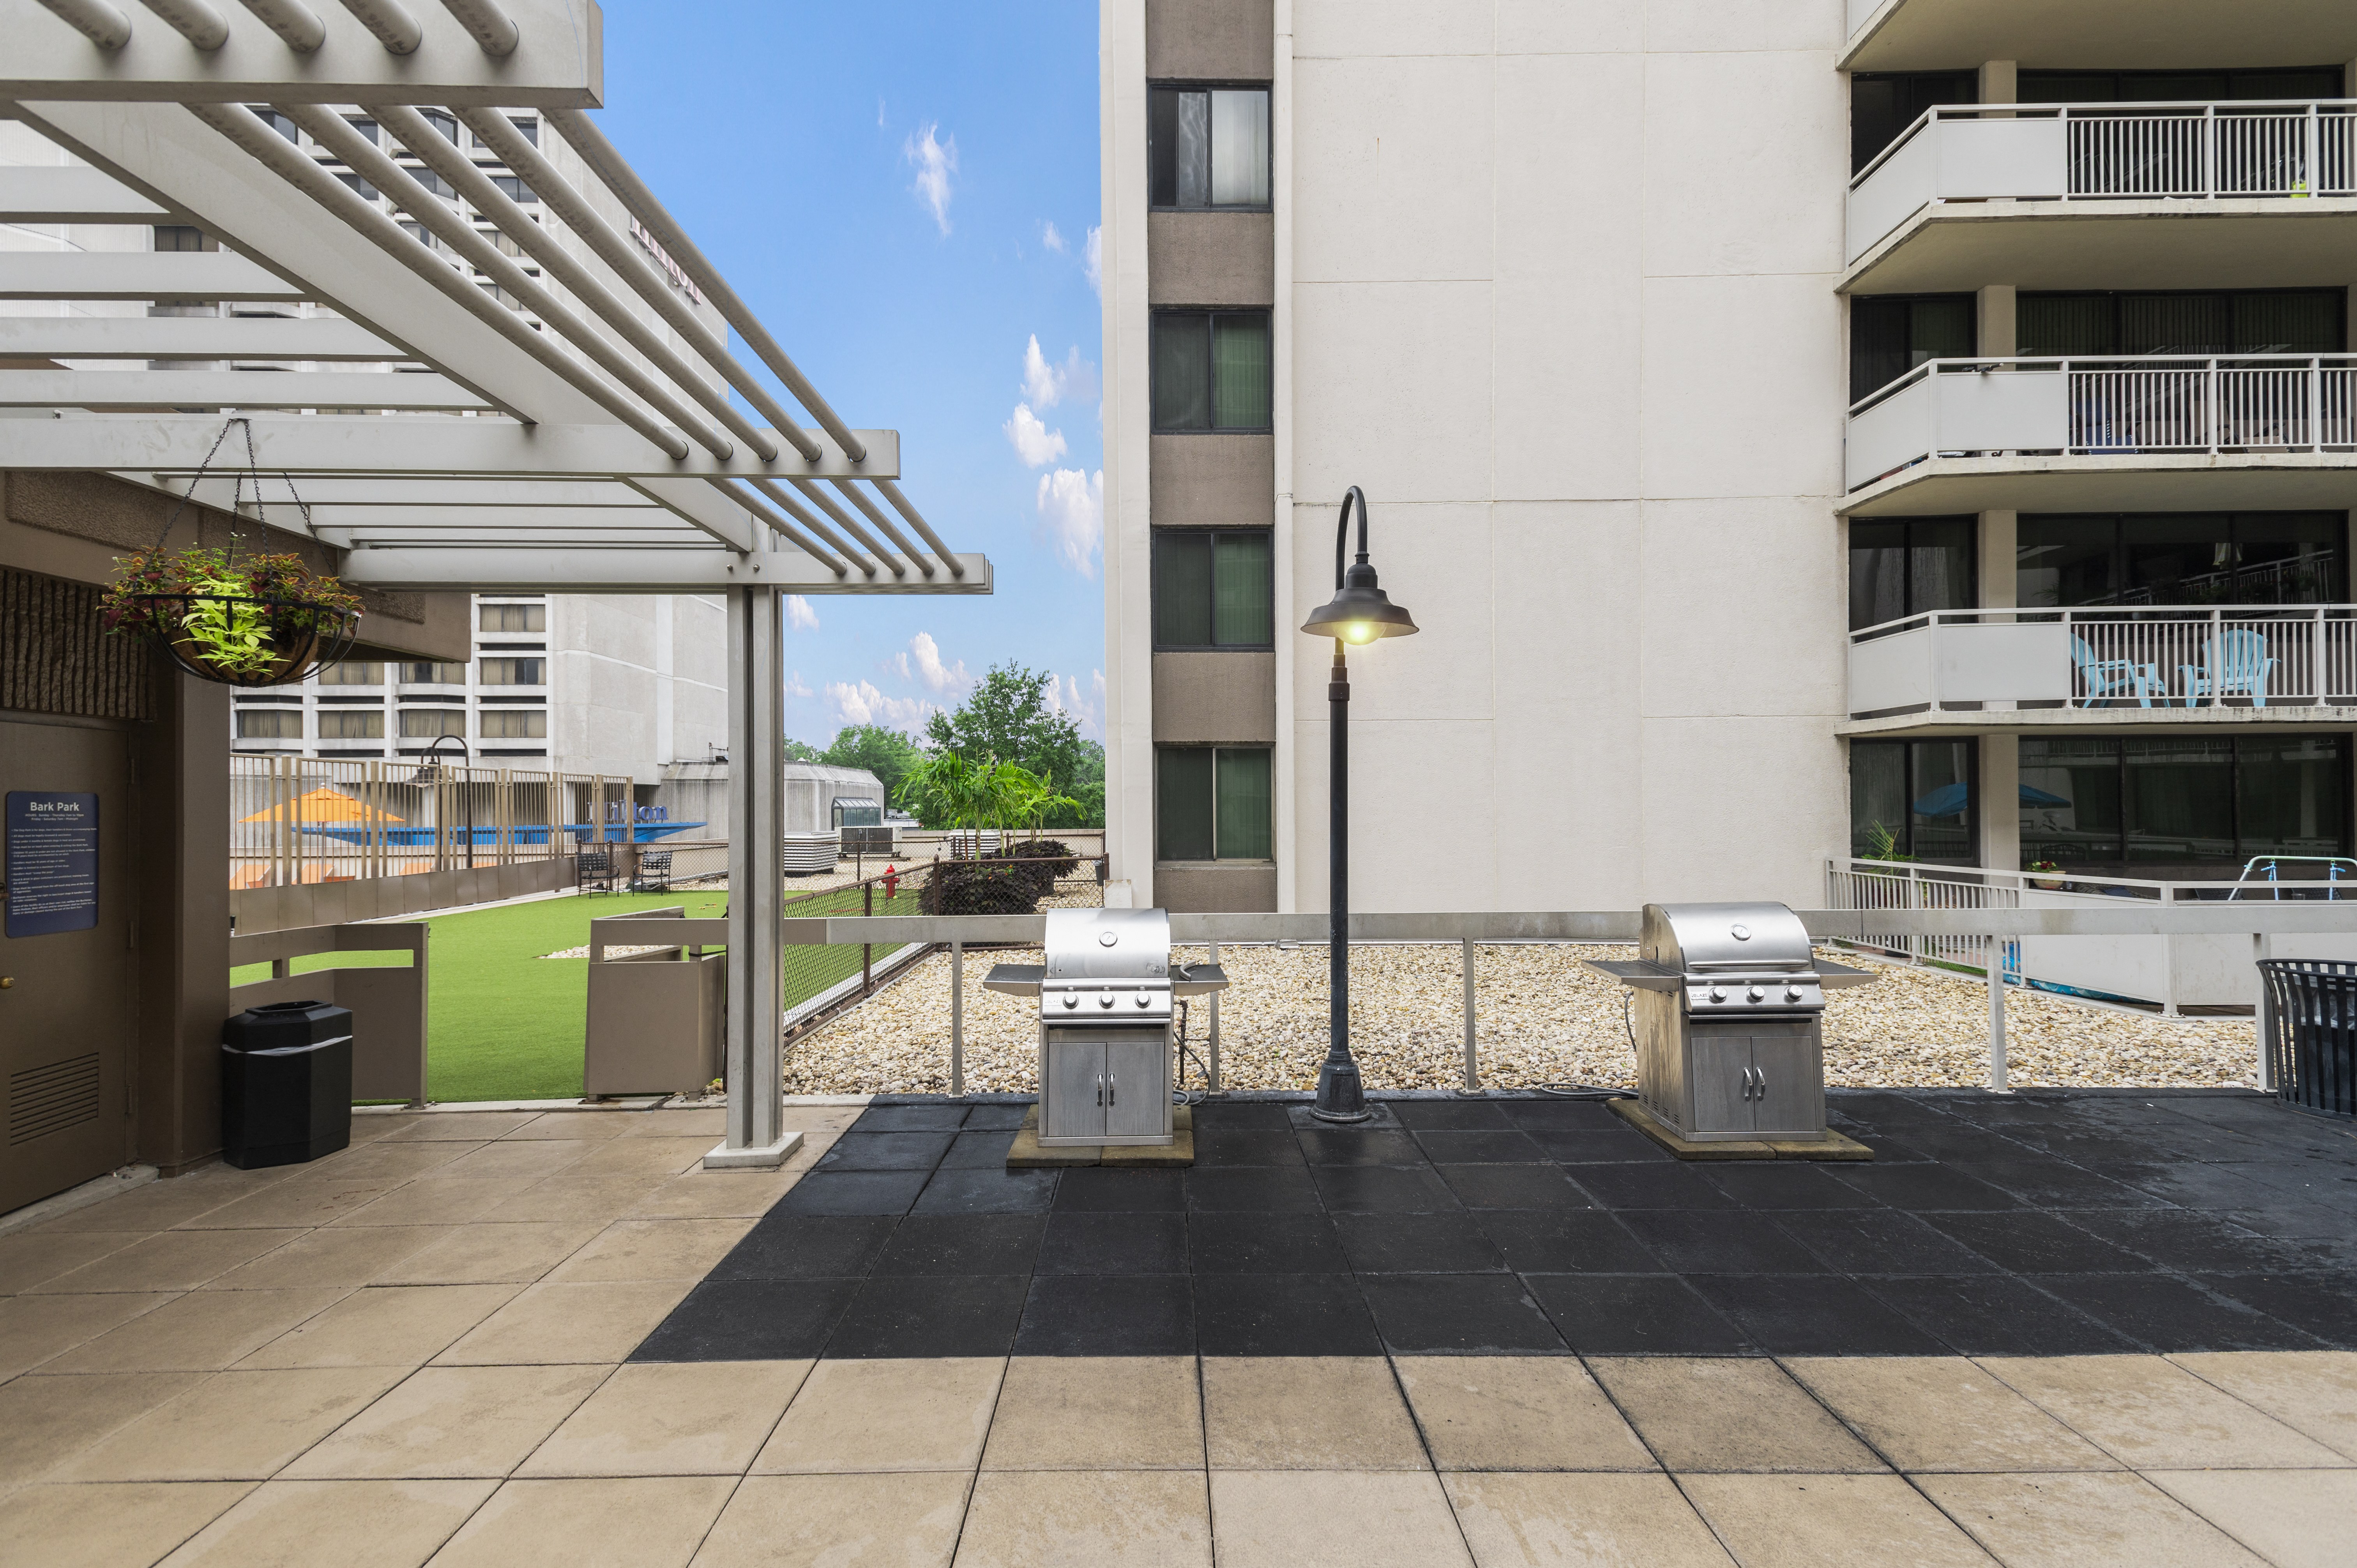 Beautifully Landscaped Courtyard with Gas Grills